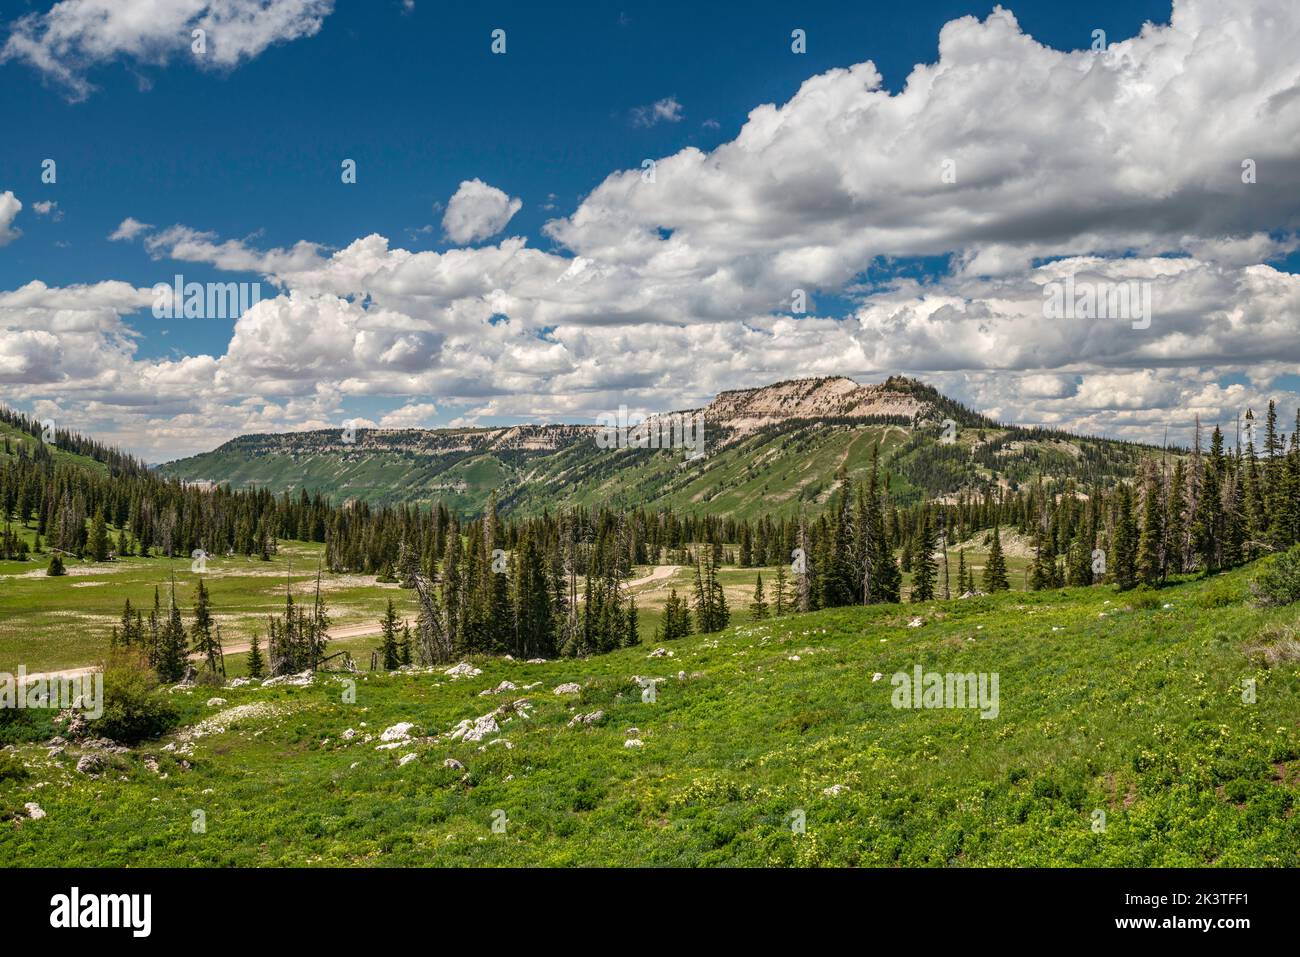 Black Mountain in dist, Hightop on right, view from Skyline Drive, across Twelvemile Flat, Wasatch Plateau, Manti La Sal National Forest, Utah, USA Stock Photo